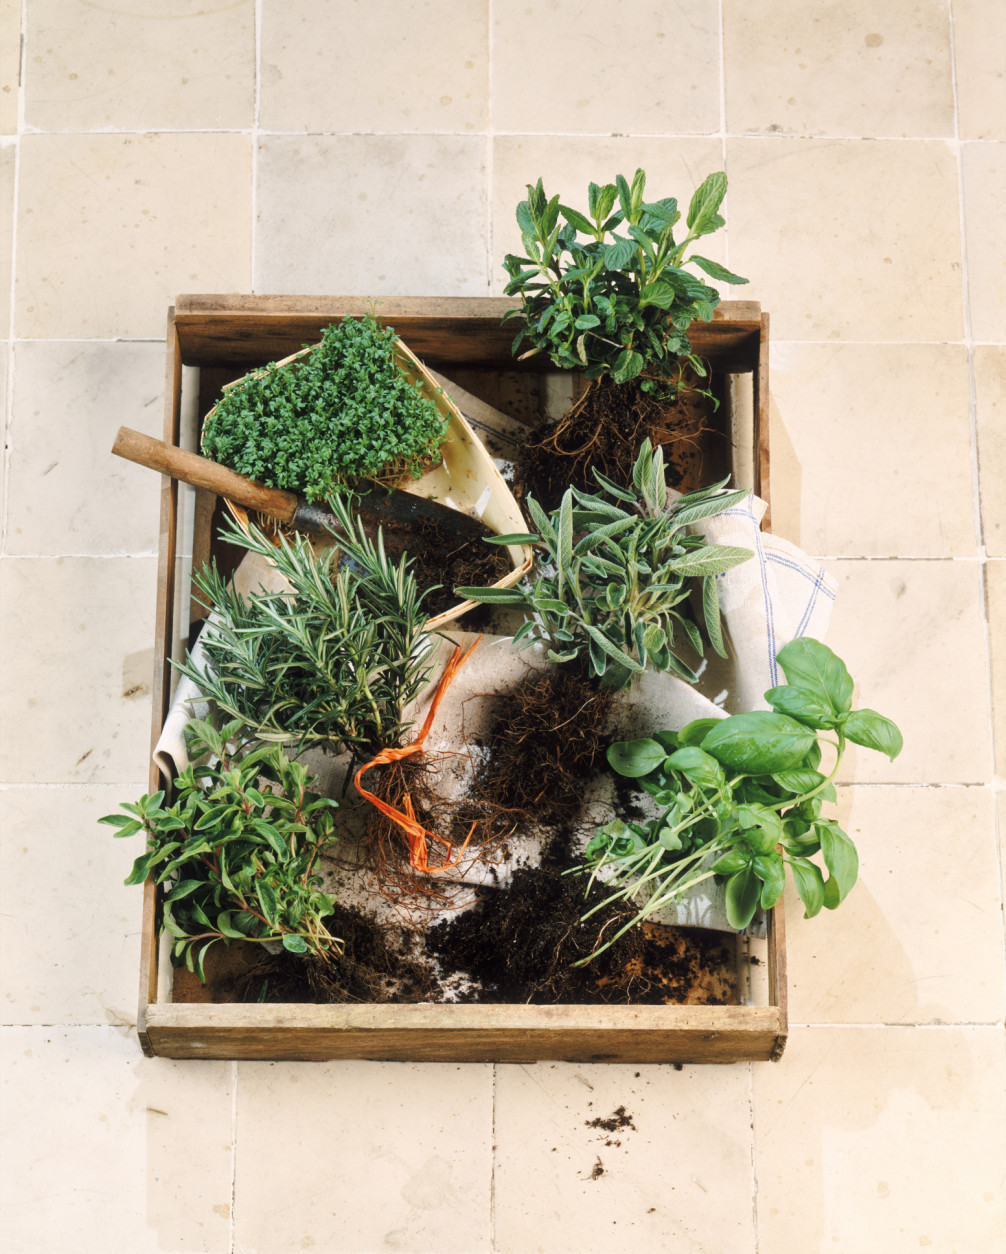 Herbal plants in carton, close-up